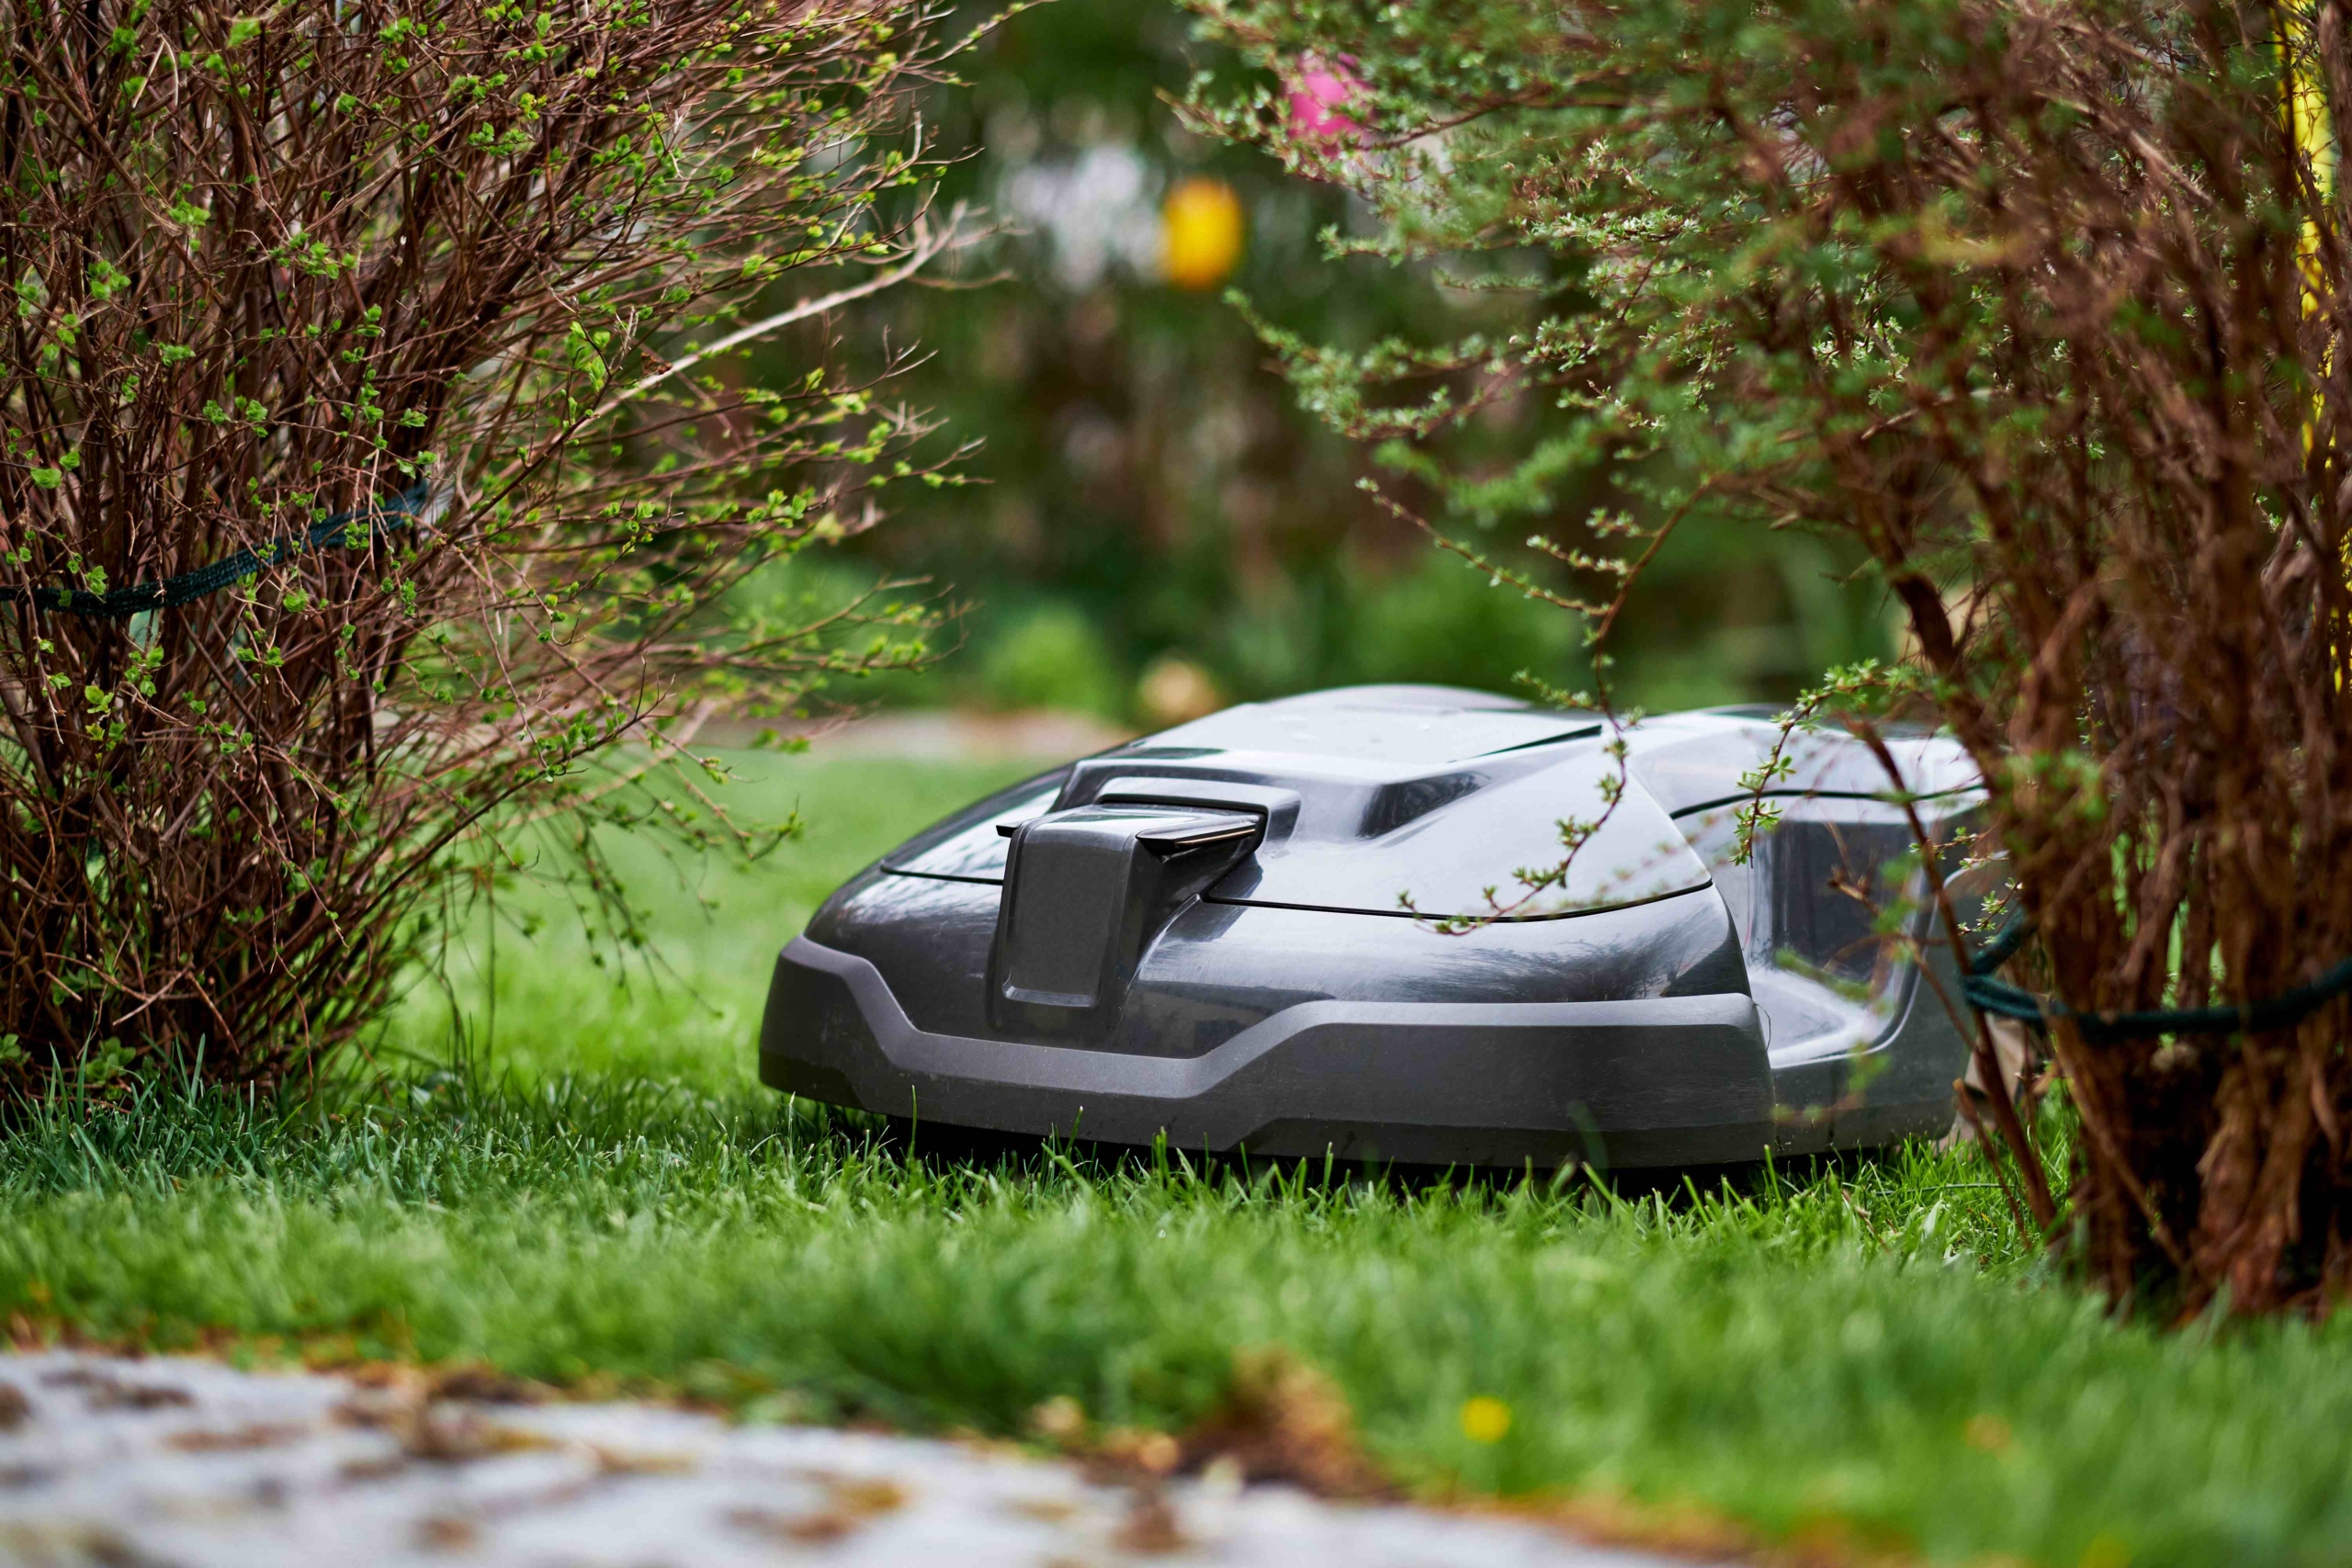 Robot lawnmower on strike? We'll take care of that.